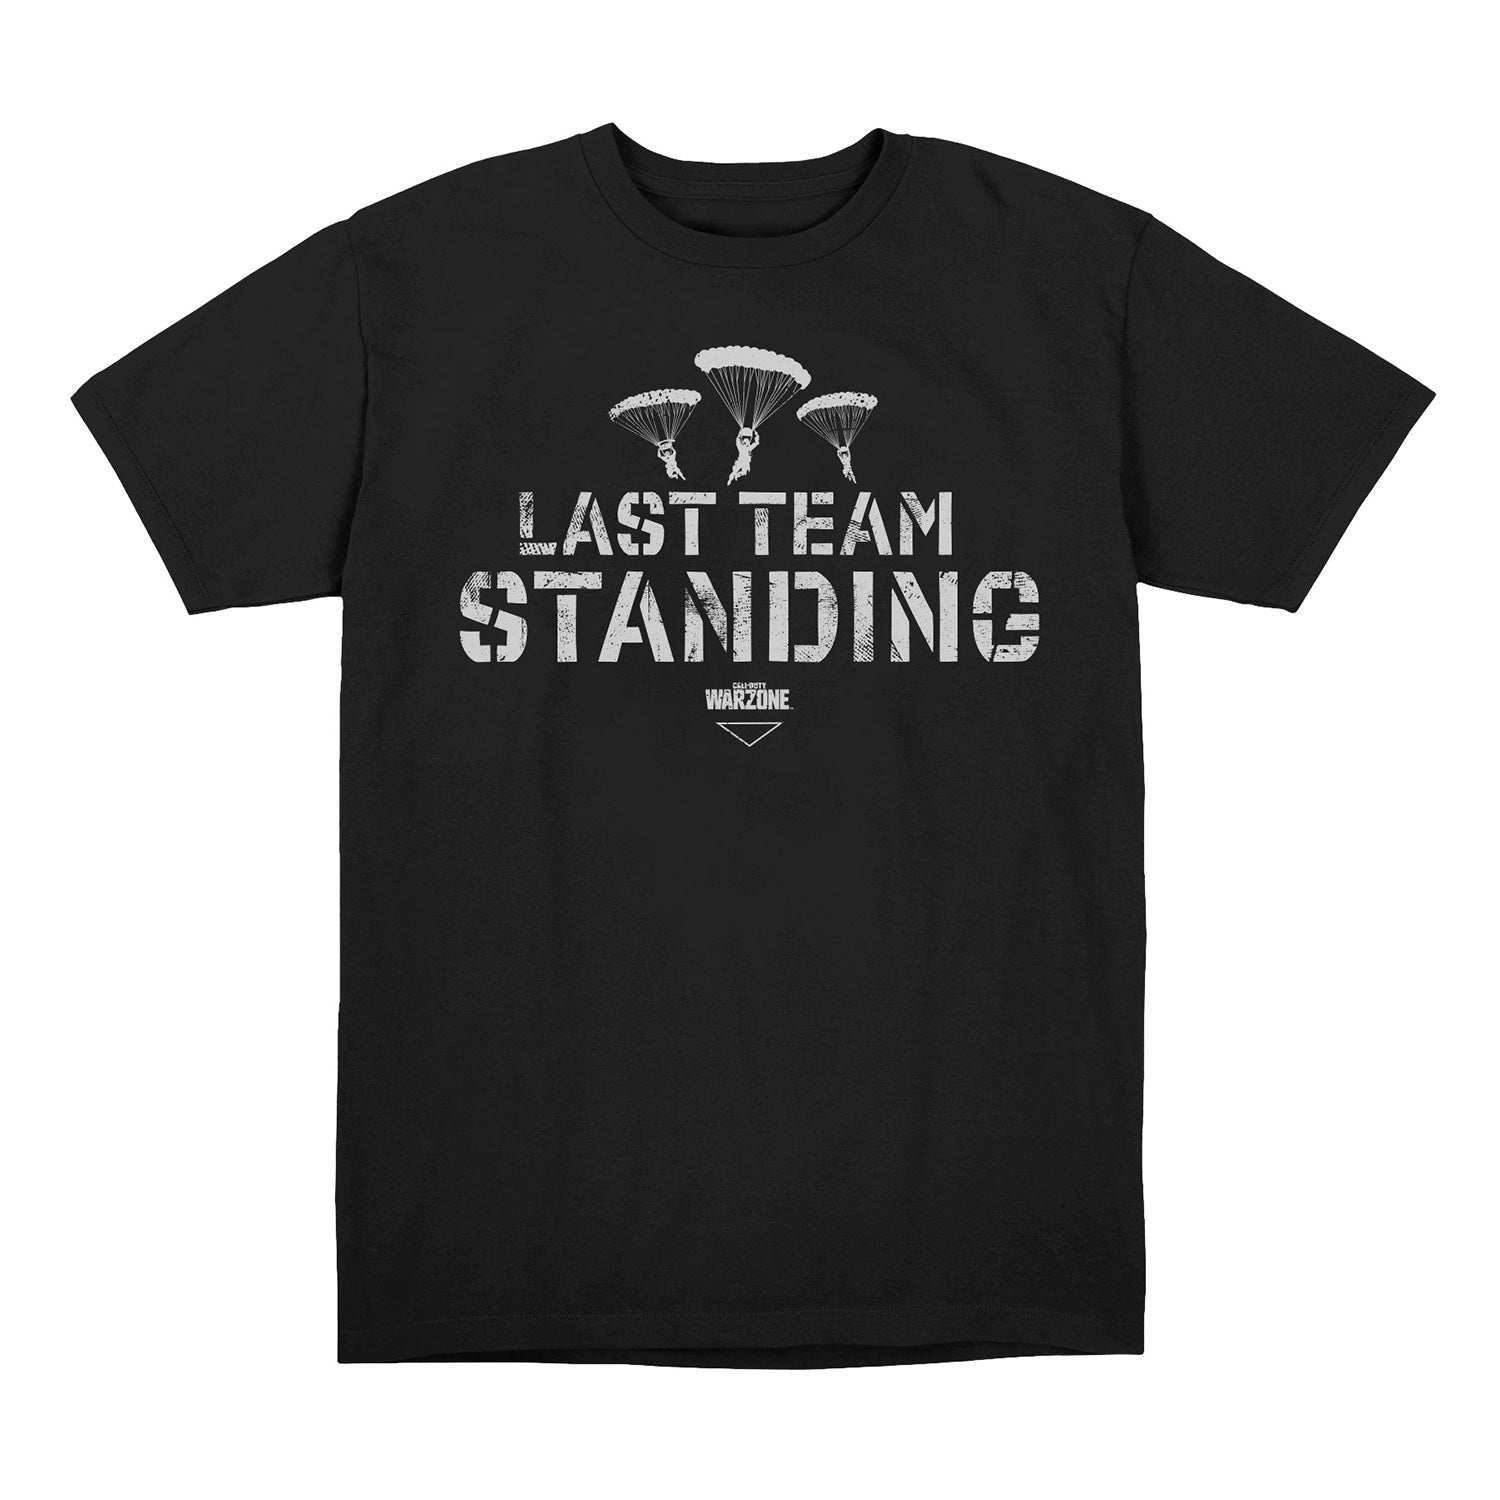 Call of Duty Last Team Standing T-Shirt - Black Front View